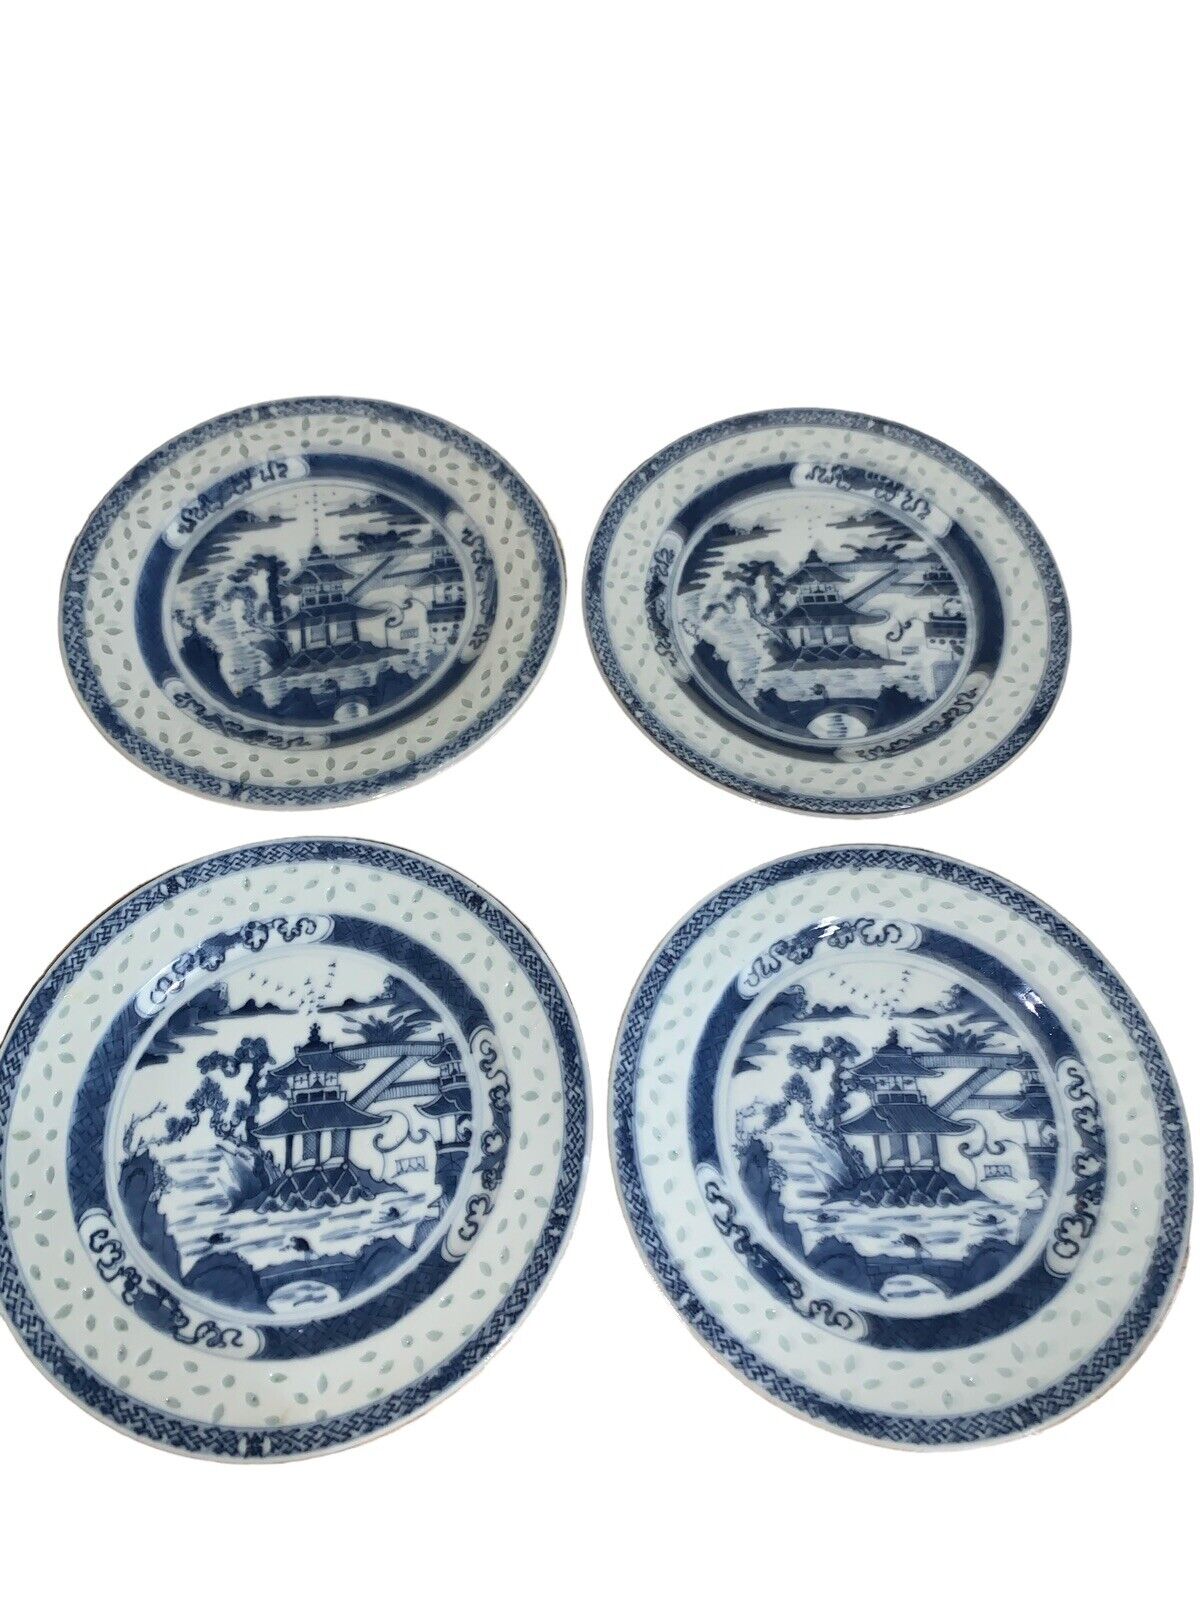 Set Of 4 Antique Chinese Rice-Grain Pagoda Porcelain Plates Blue & White READ